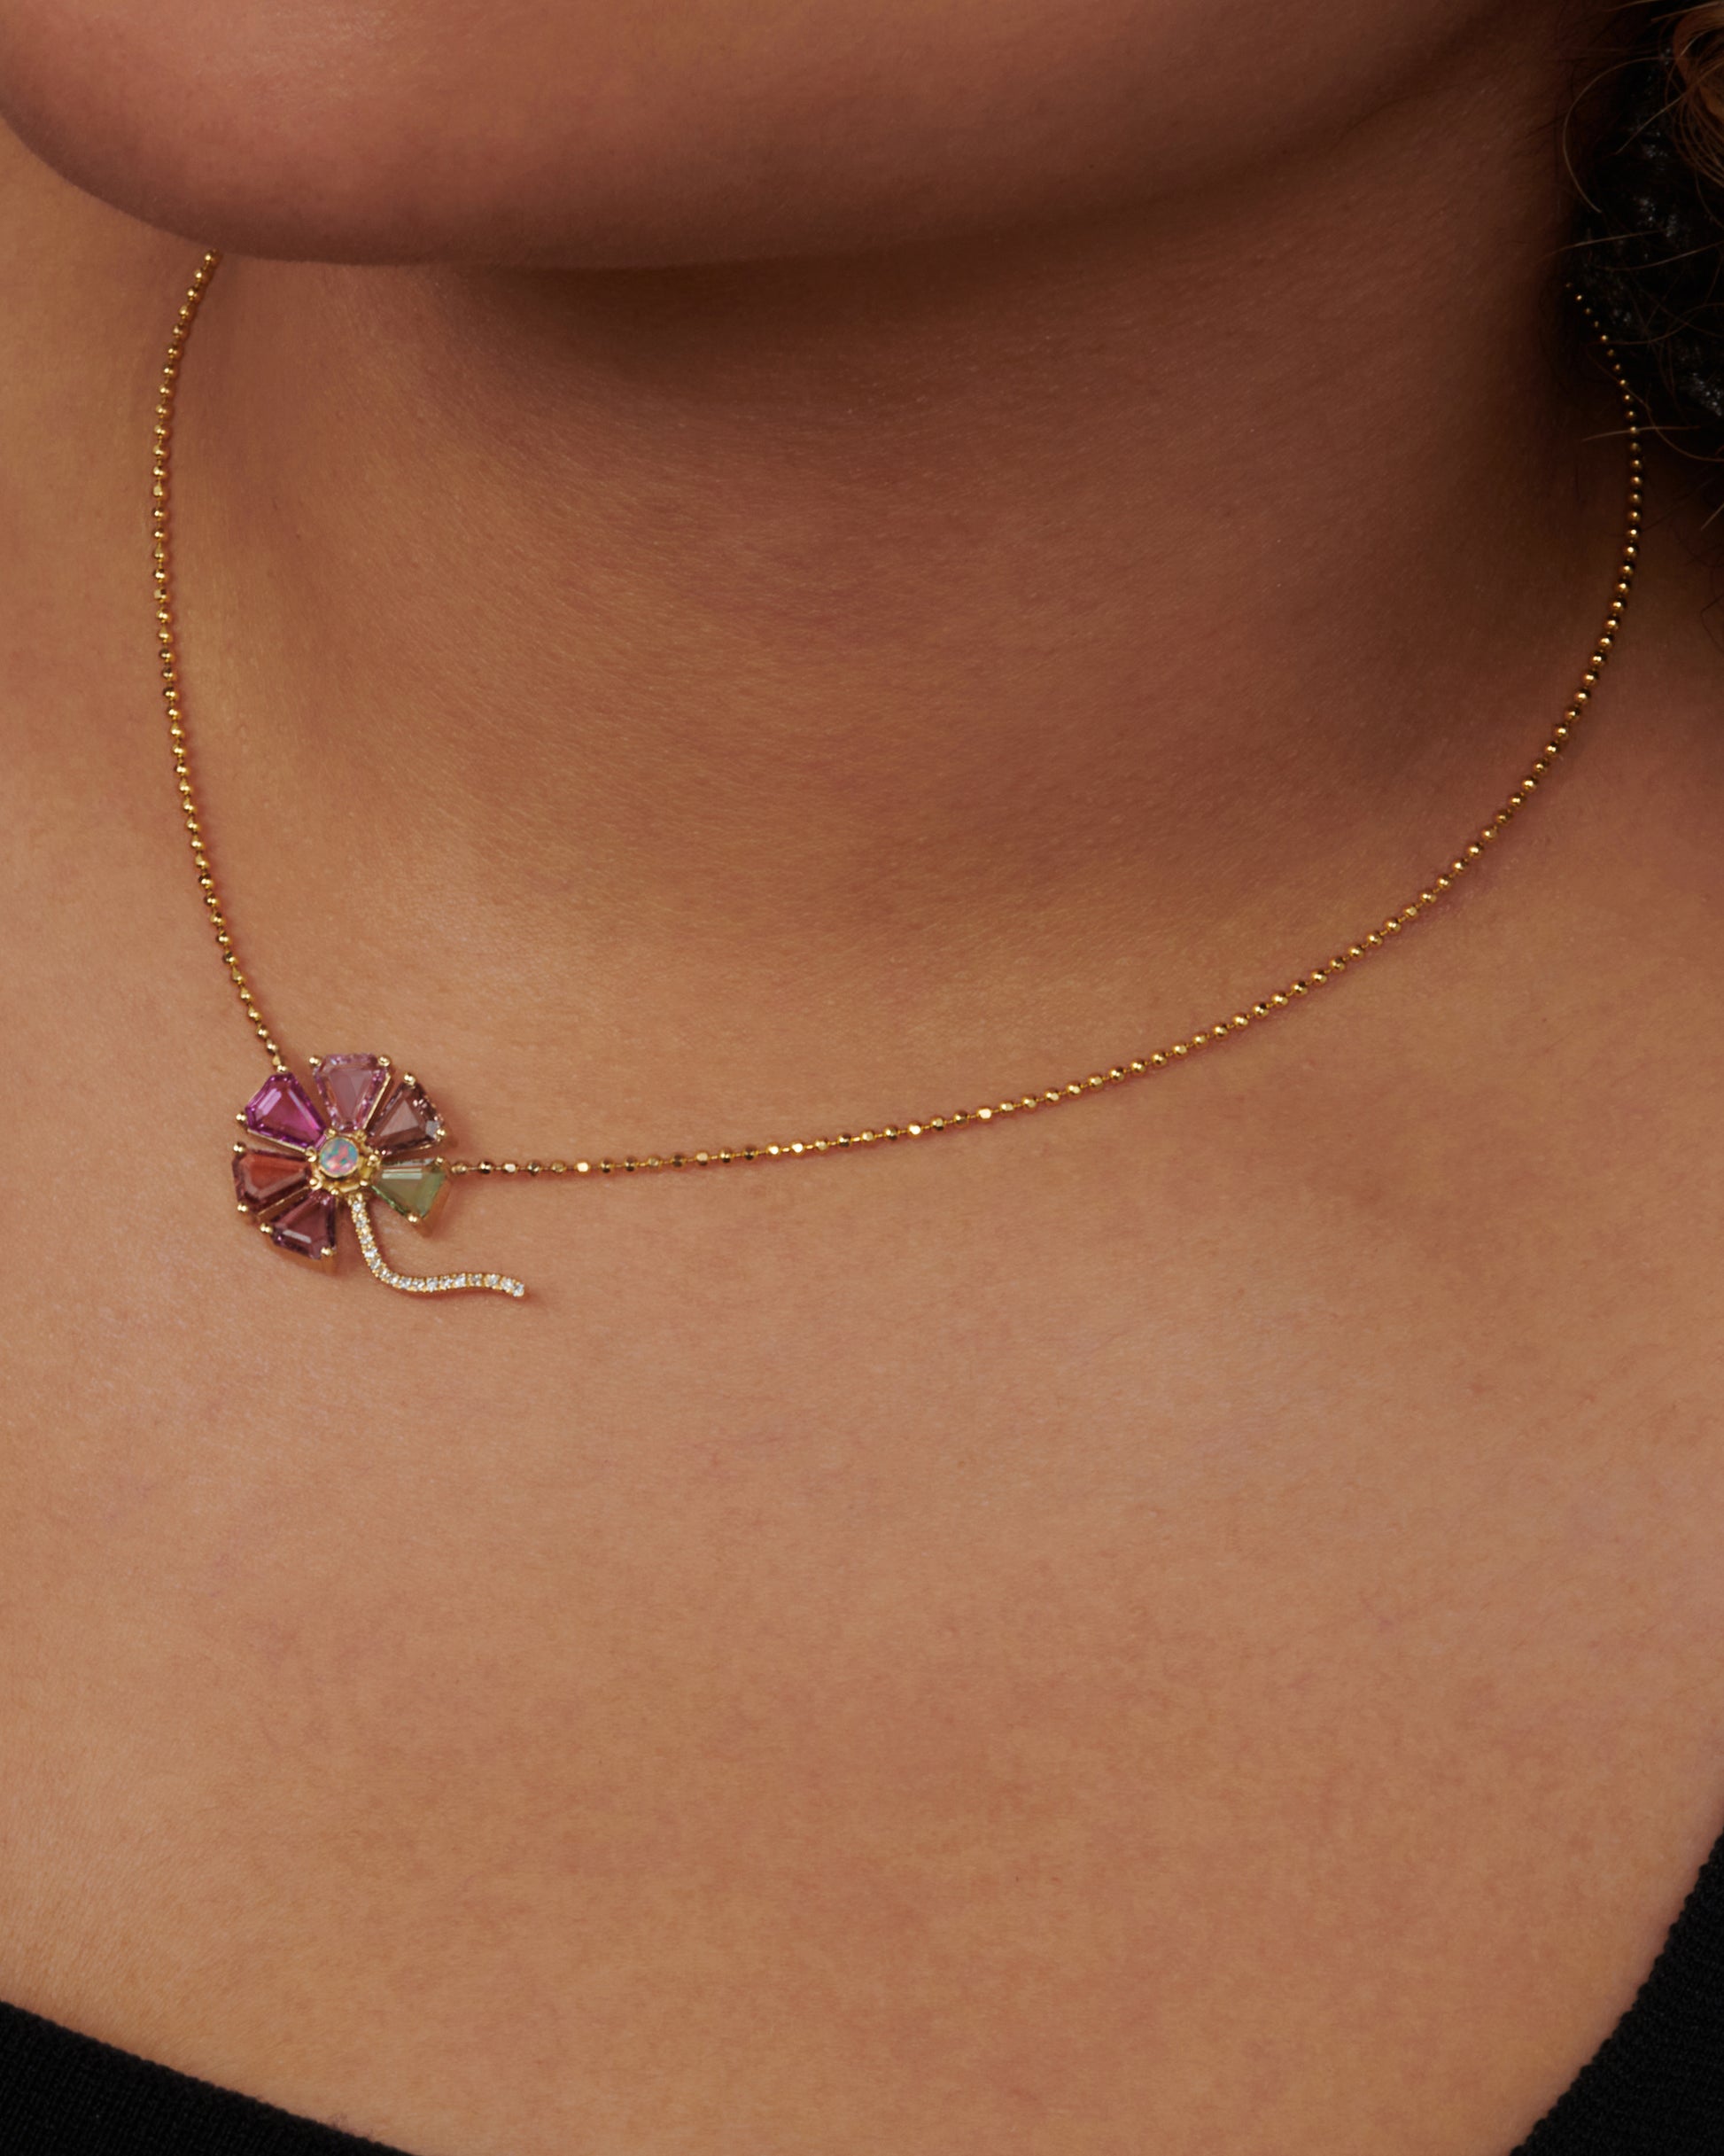 A zoomed out view of a flower pendant with sapphire petals, diamond stem, and opal center on a gold ball chain. Shown on a neck.